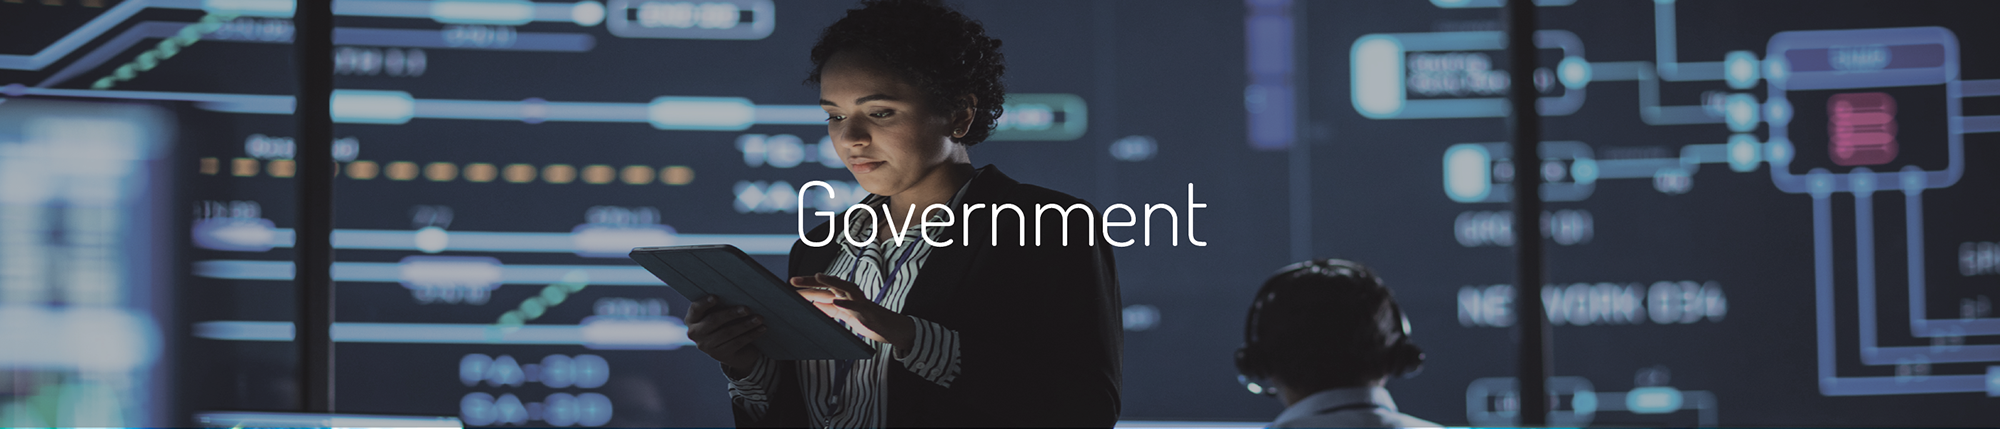 Main Image - Government